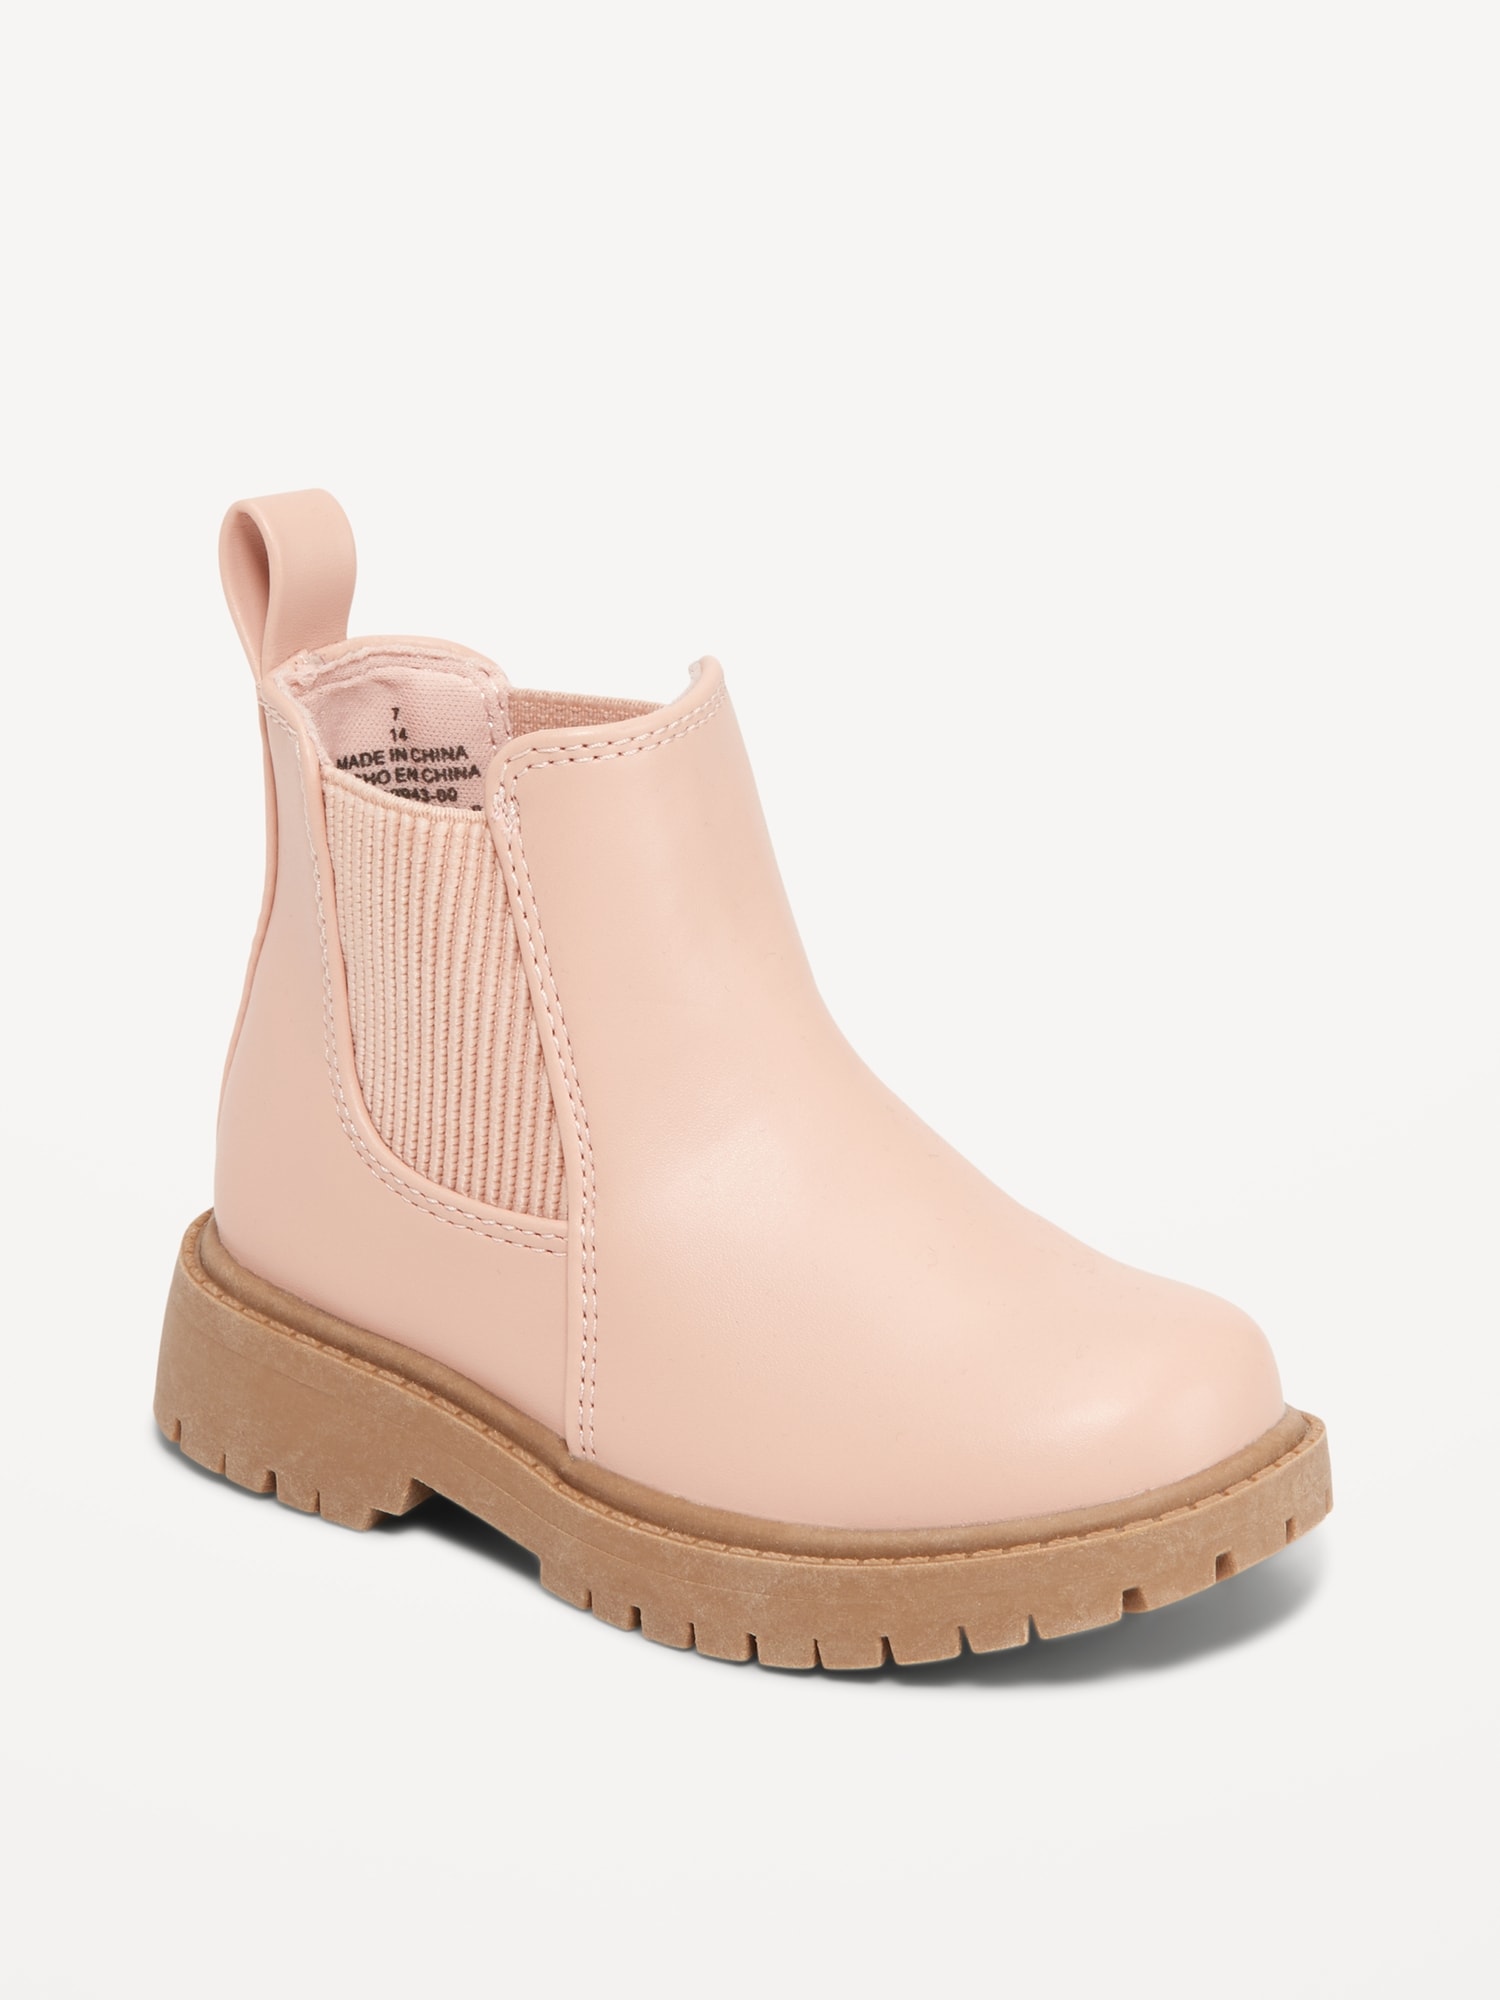 Faux-Leather Chelsea Boots for Toddler Girls